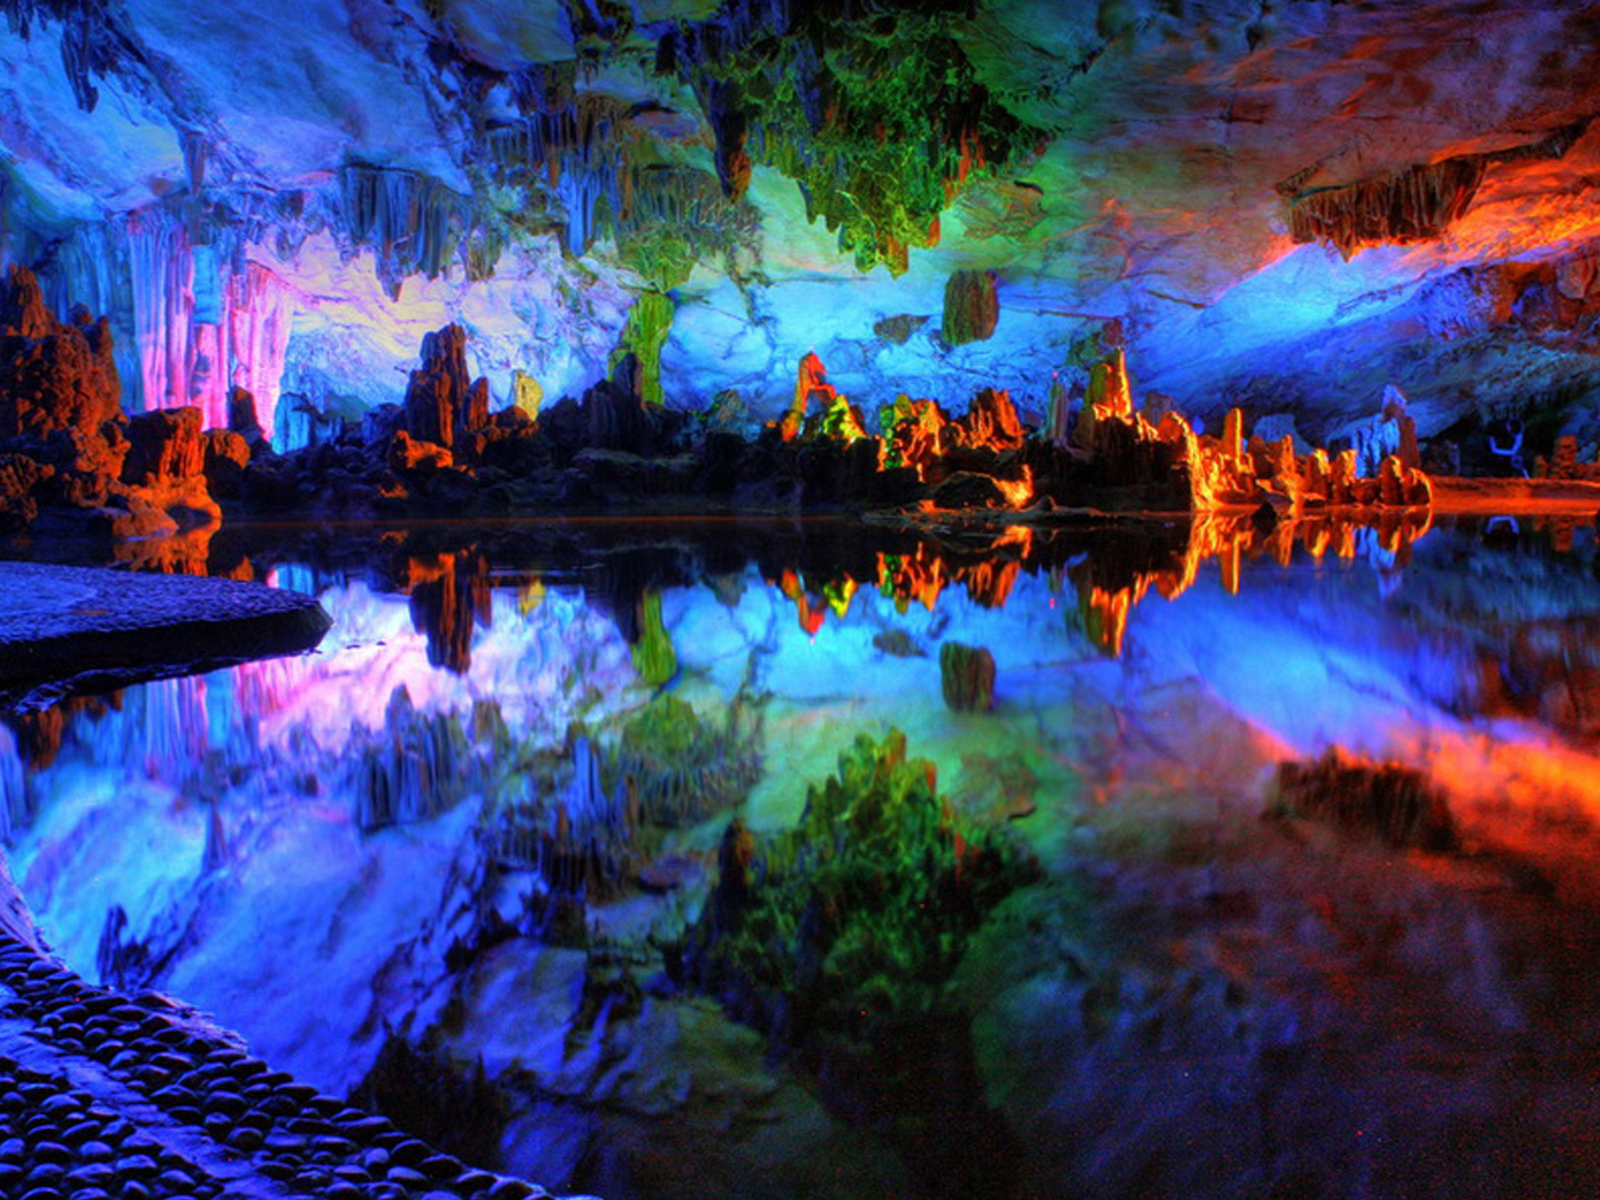 The internal view of Reed Flute Cave